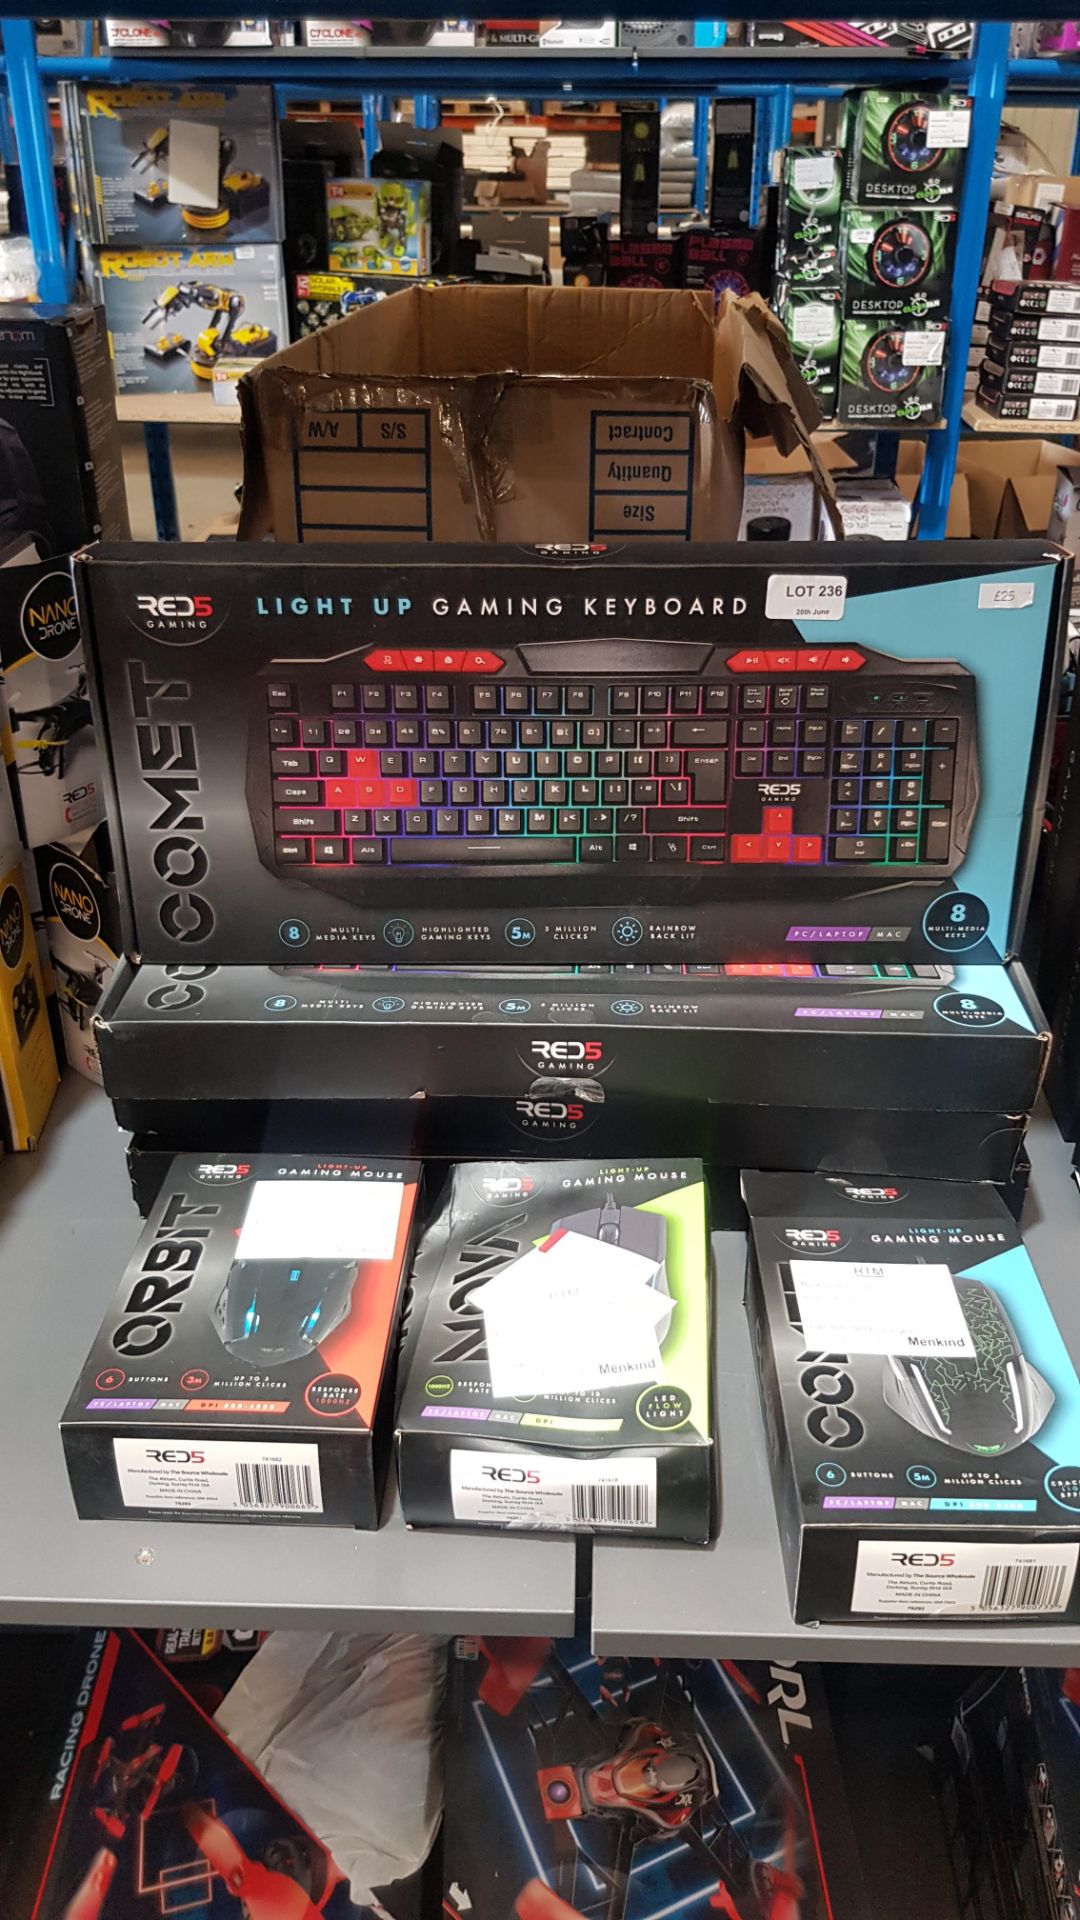 (R2F) 7 Items. 4x Red5 Light Up Gaming Keyboard. 3x Red5 Gaming Mouse (1x Orbit. 1x Nova. 1x Comet) - Image 5 of 5